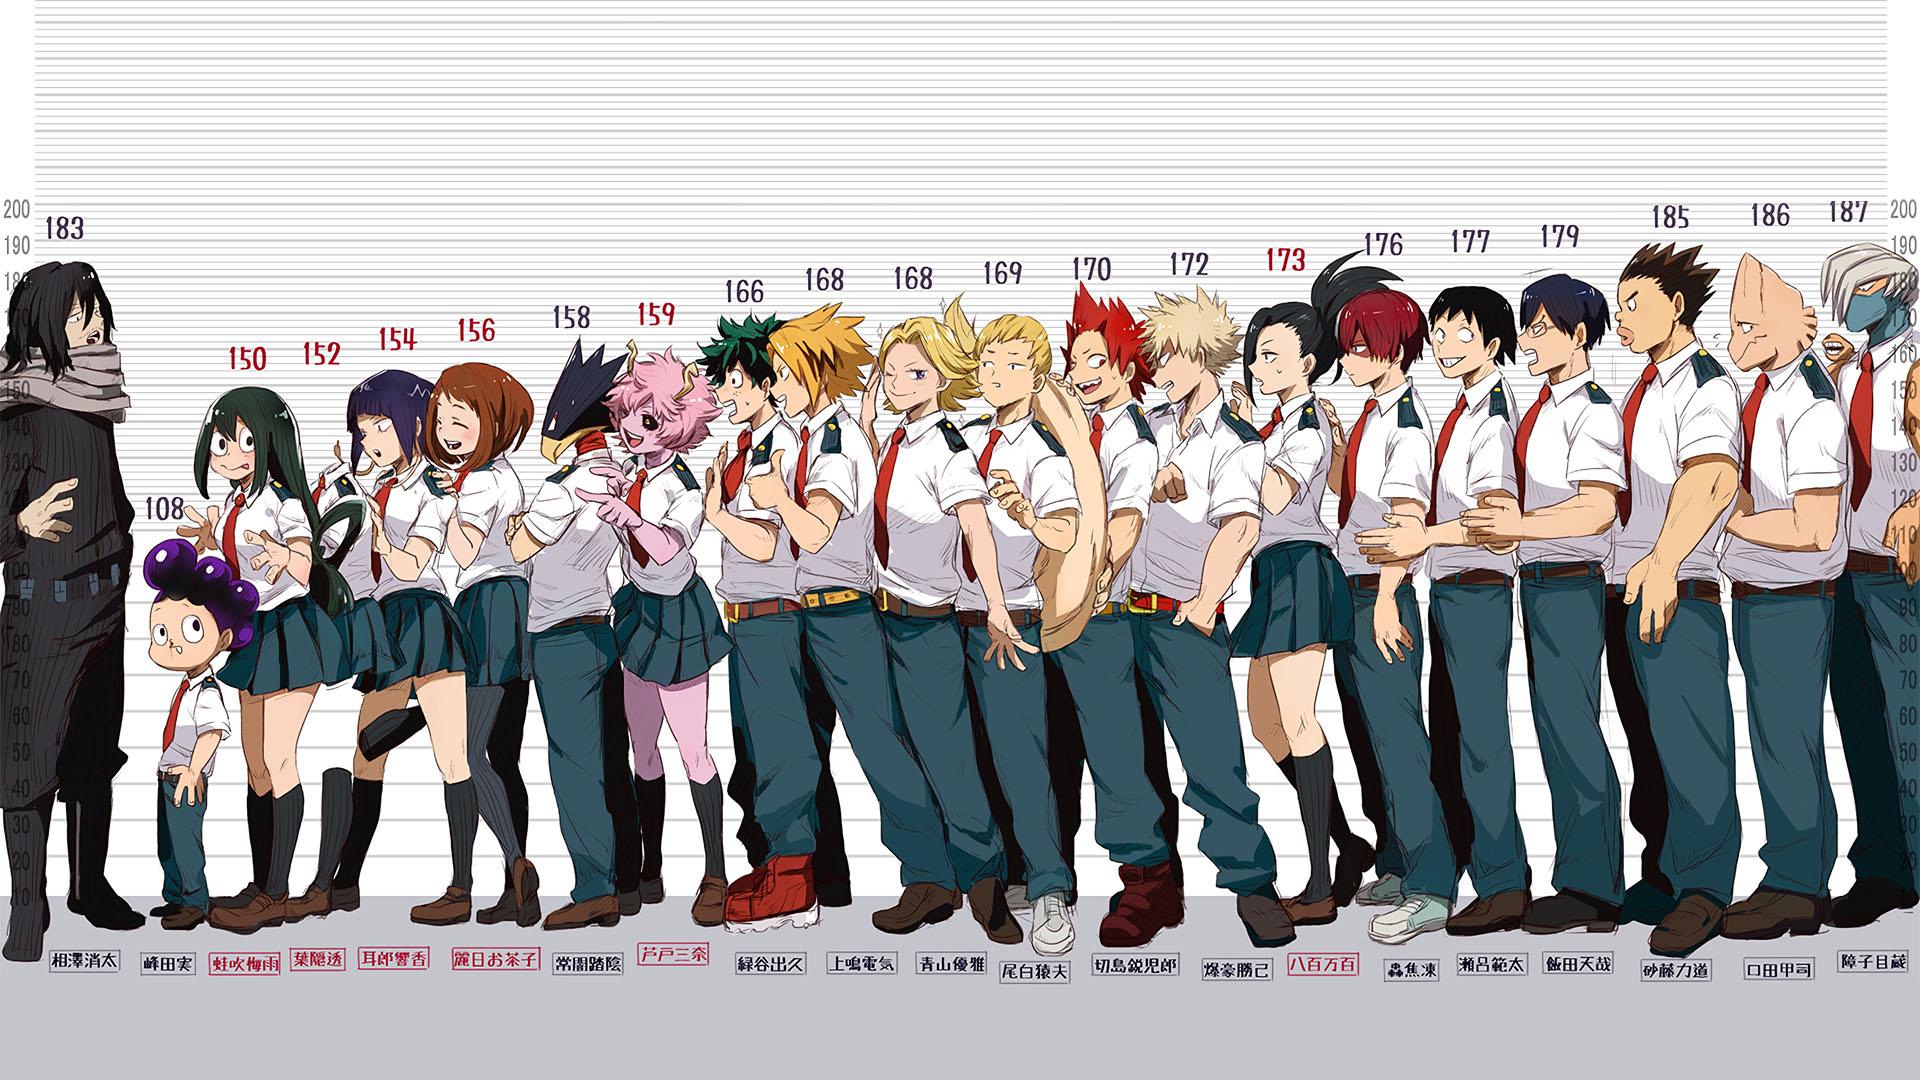 Download Wallpaper From Anime My Hero Academia With